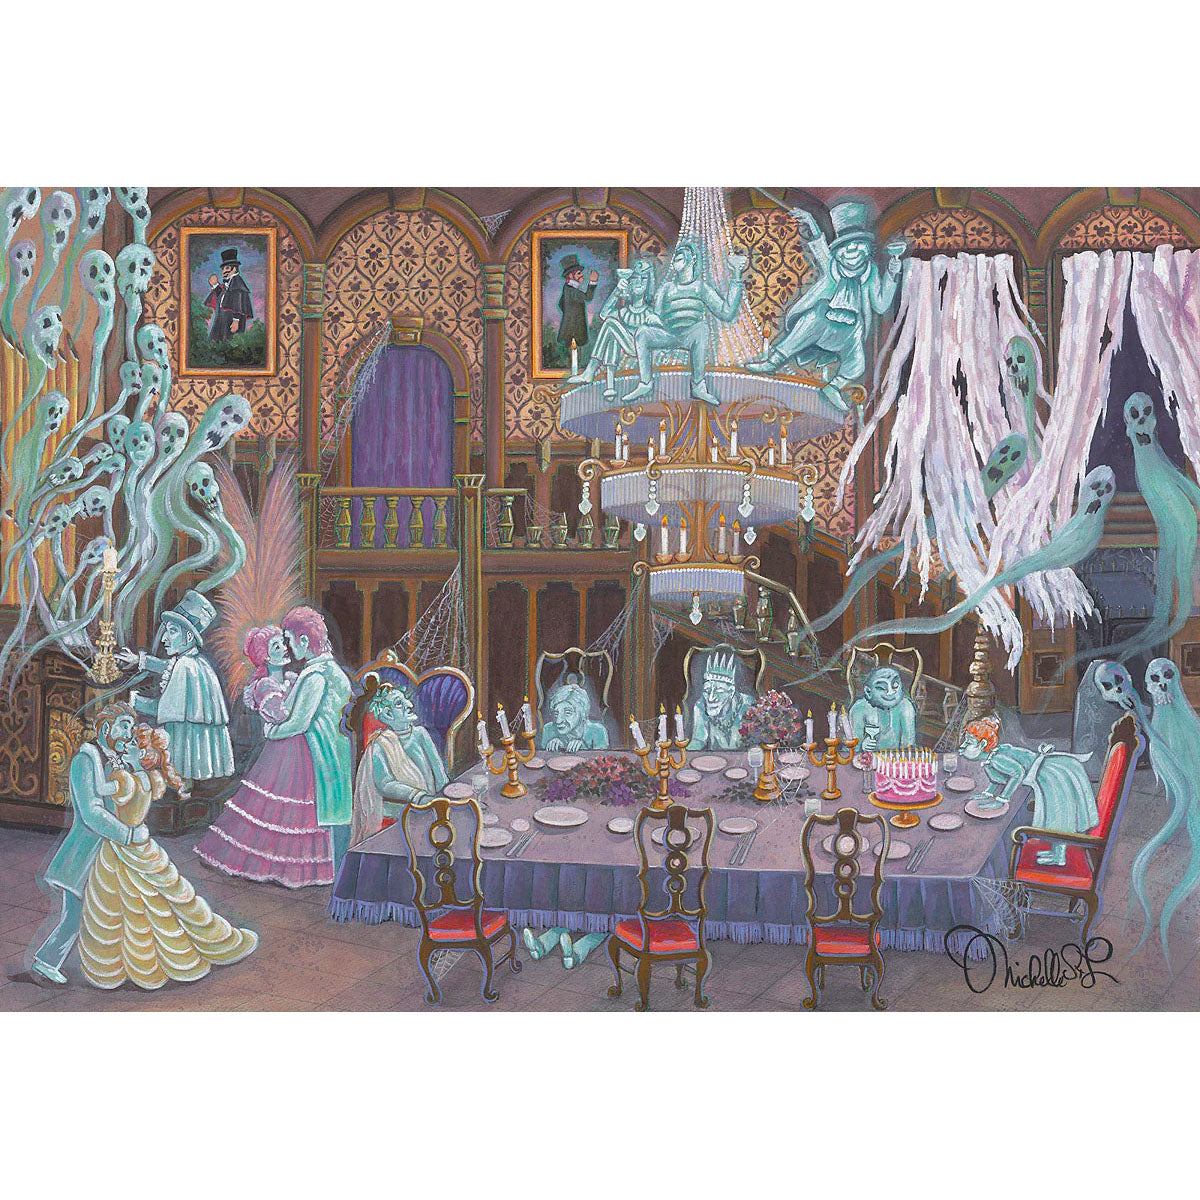 Michelle St. Laurent Disney "Haunted Ballroom" Limited Edition Canvas Giclee